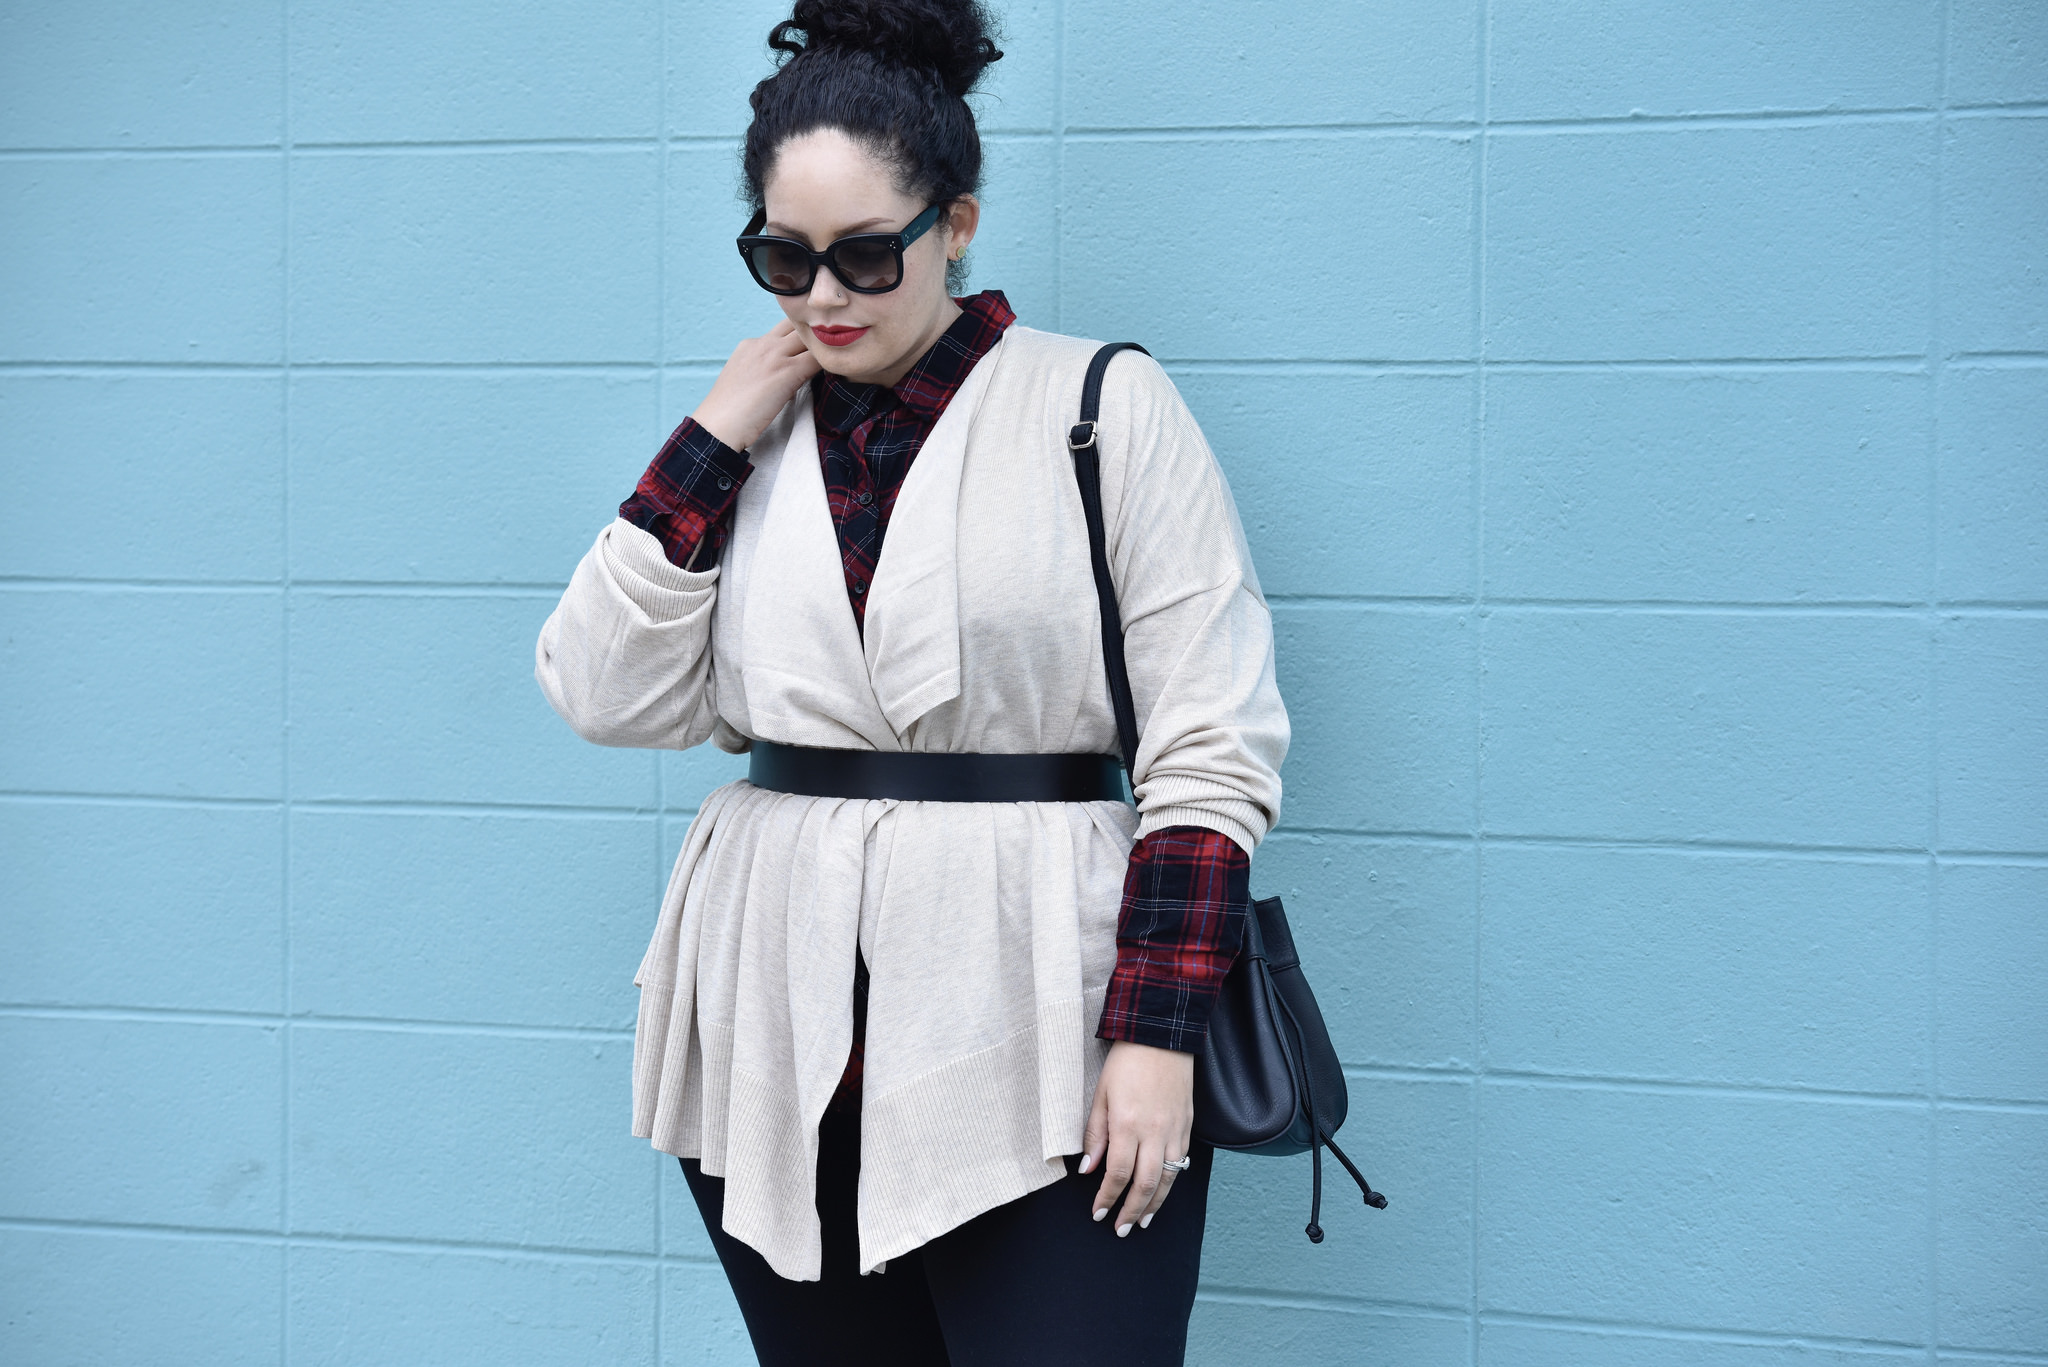 The Easiest Way To Layer For Fall Via @GirlWithCurves #blogger #plussize #ootd #outfits #style #fashion.